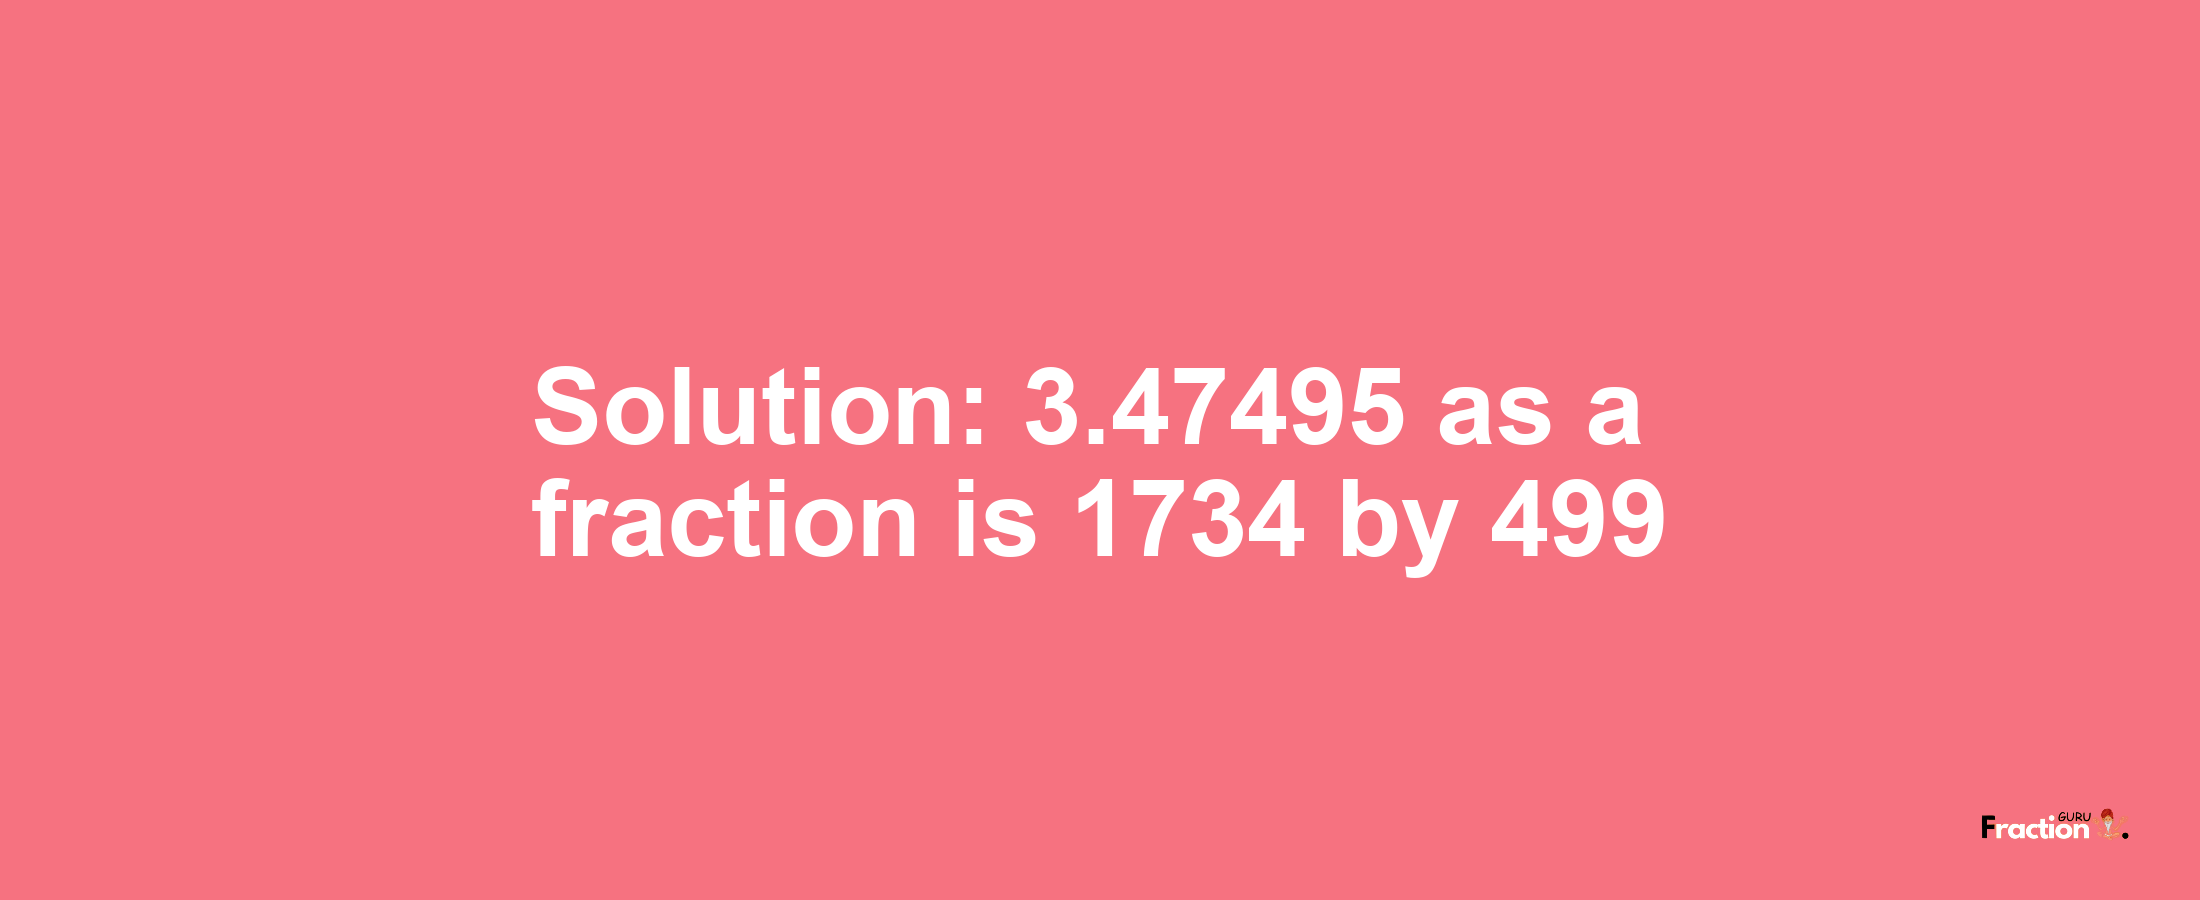 Solution:3.47495 as a fraction is 1734/499